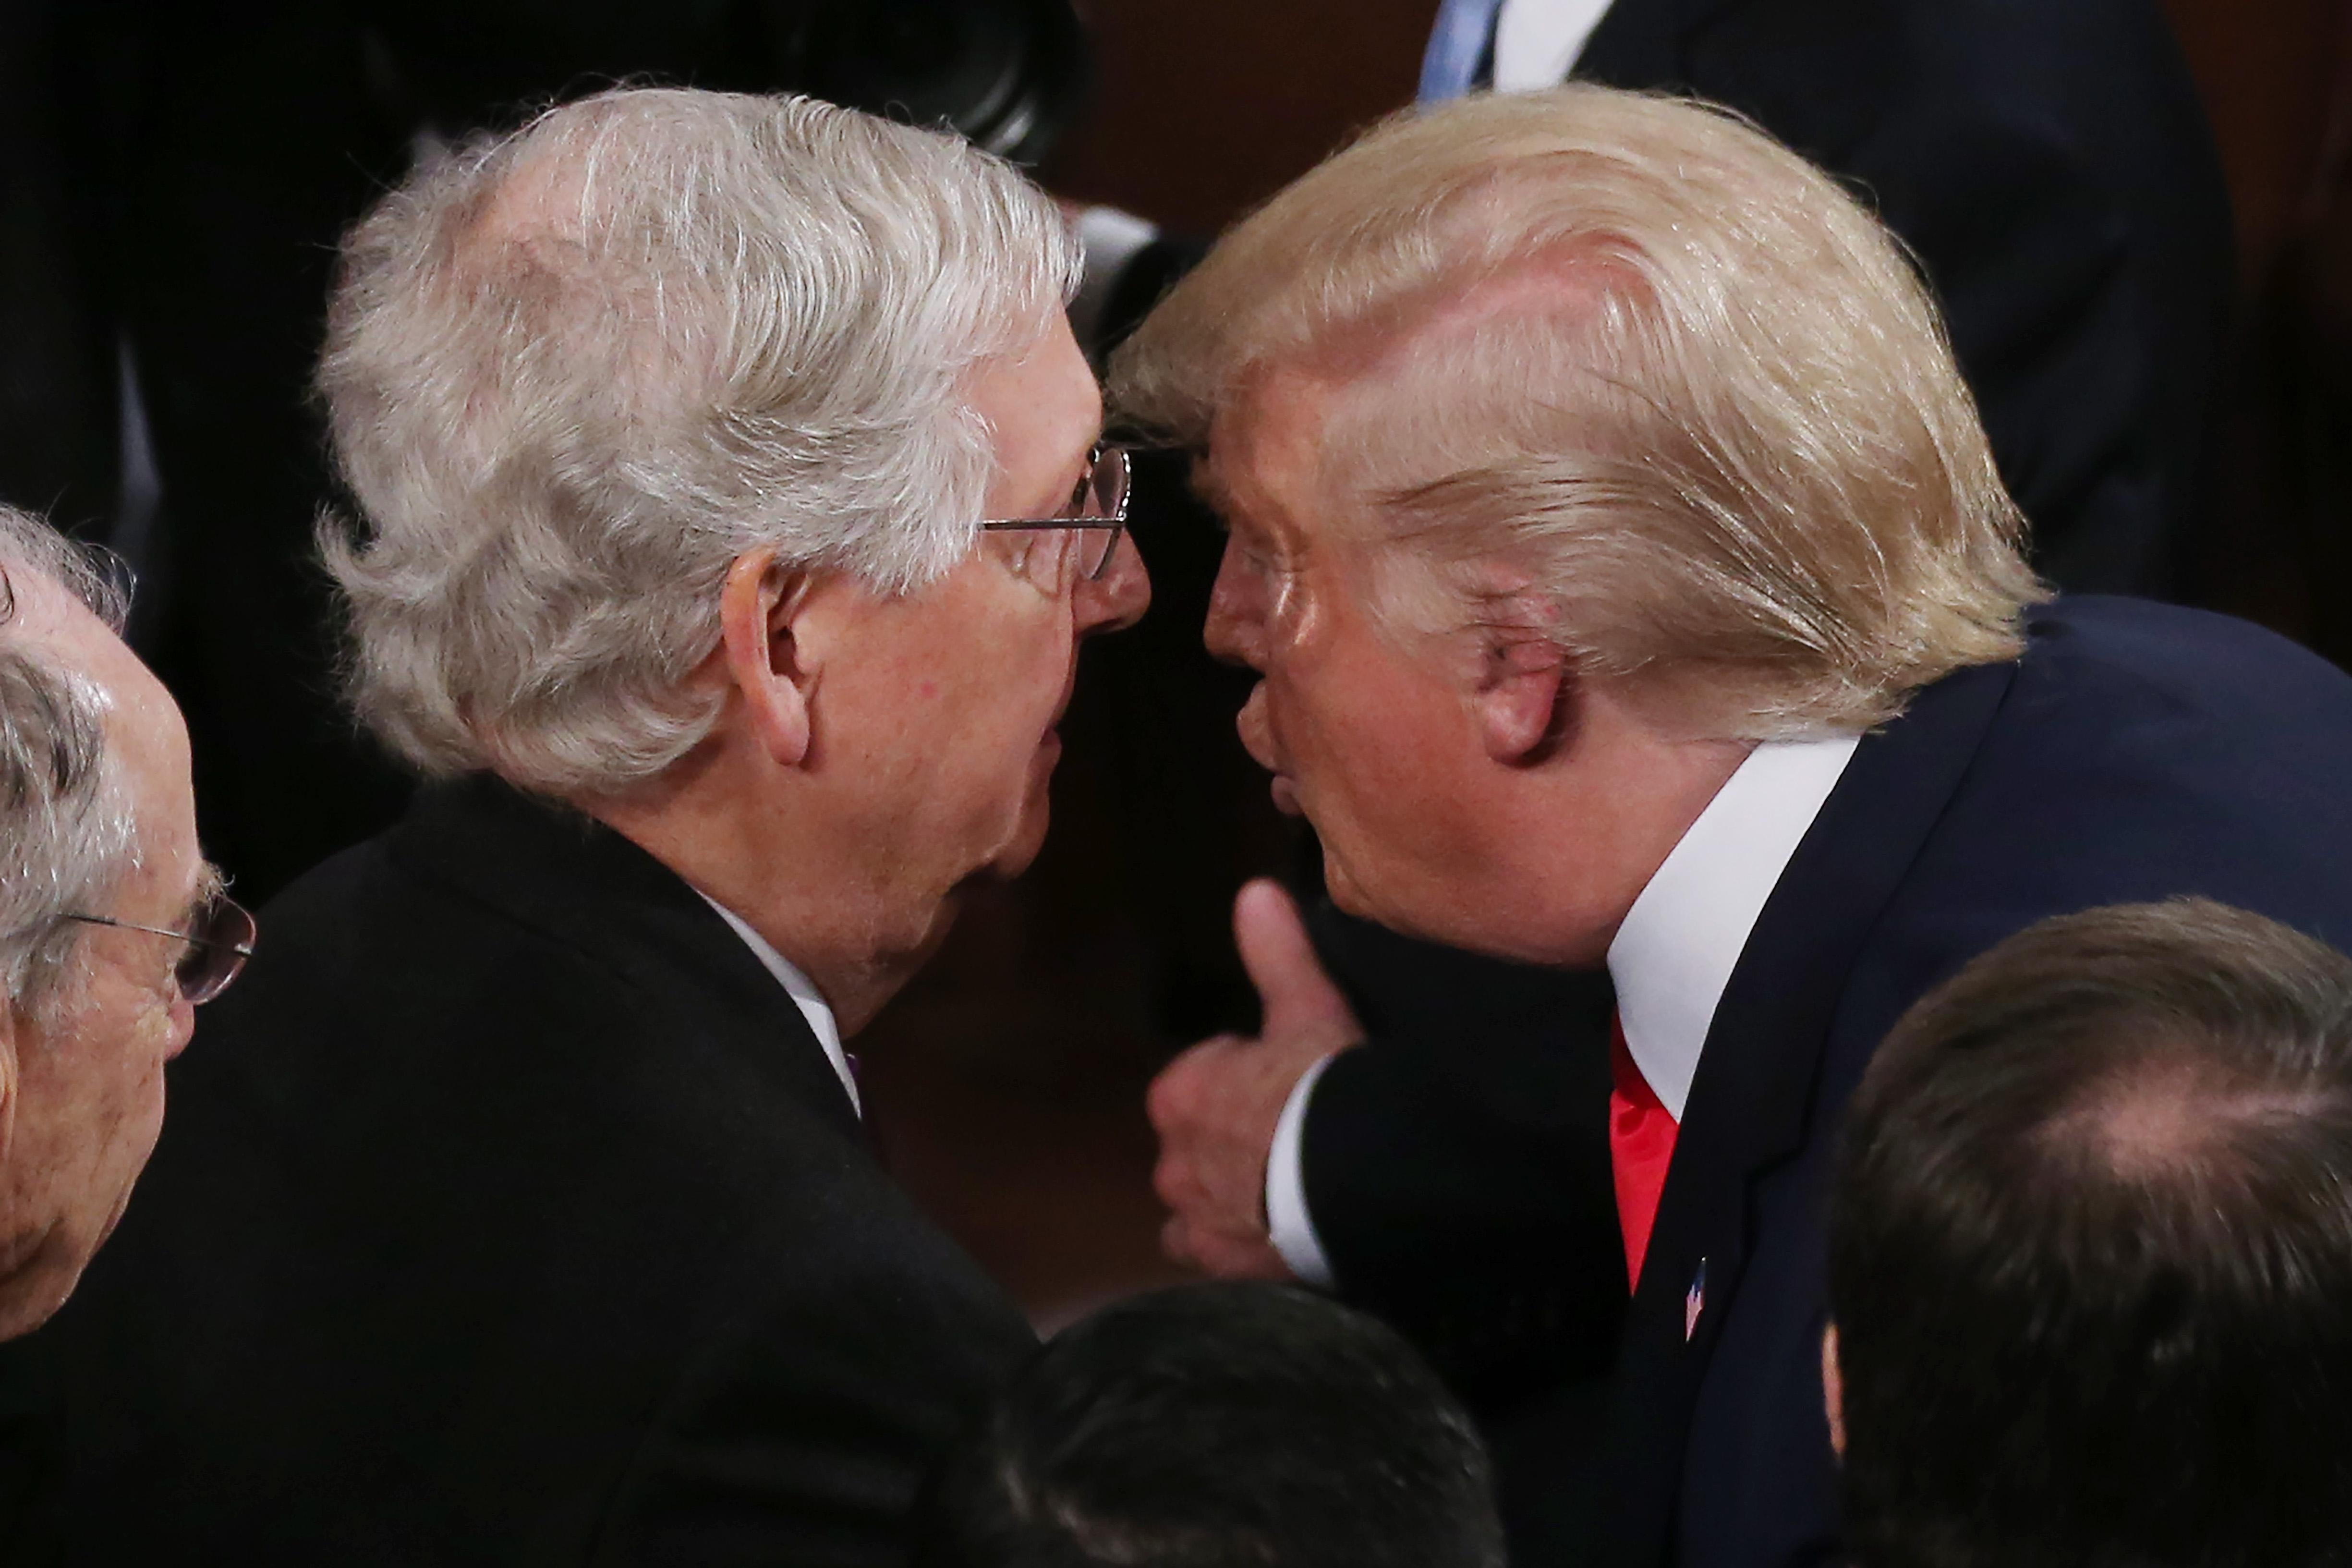 Trump leans in closely to speak to Mitch McConnell.